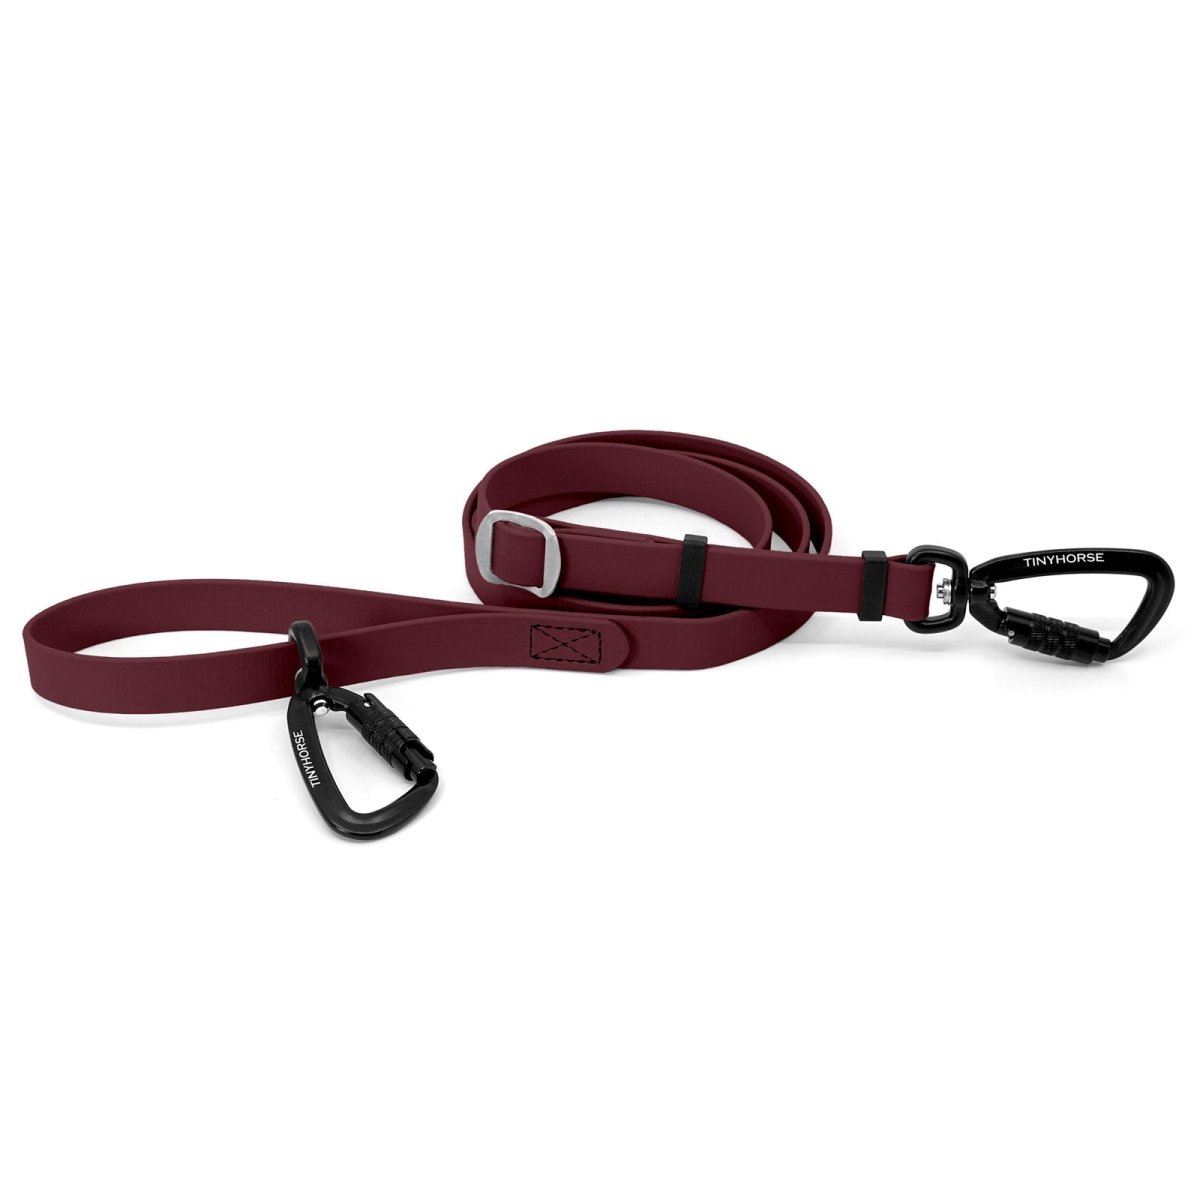 An adjustable burgundy-coloured Lead-All Pro Extra made of BioThane with 2 auto-locking carabiners